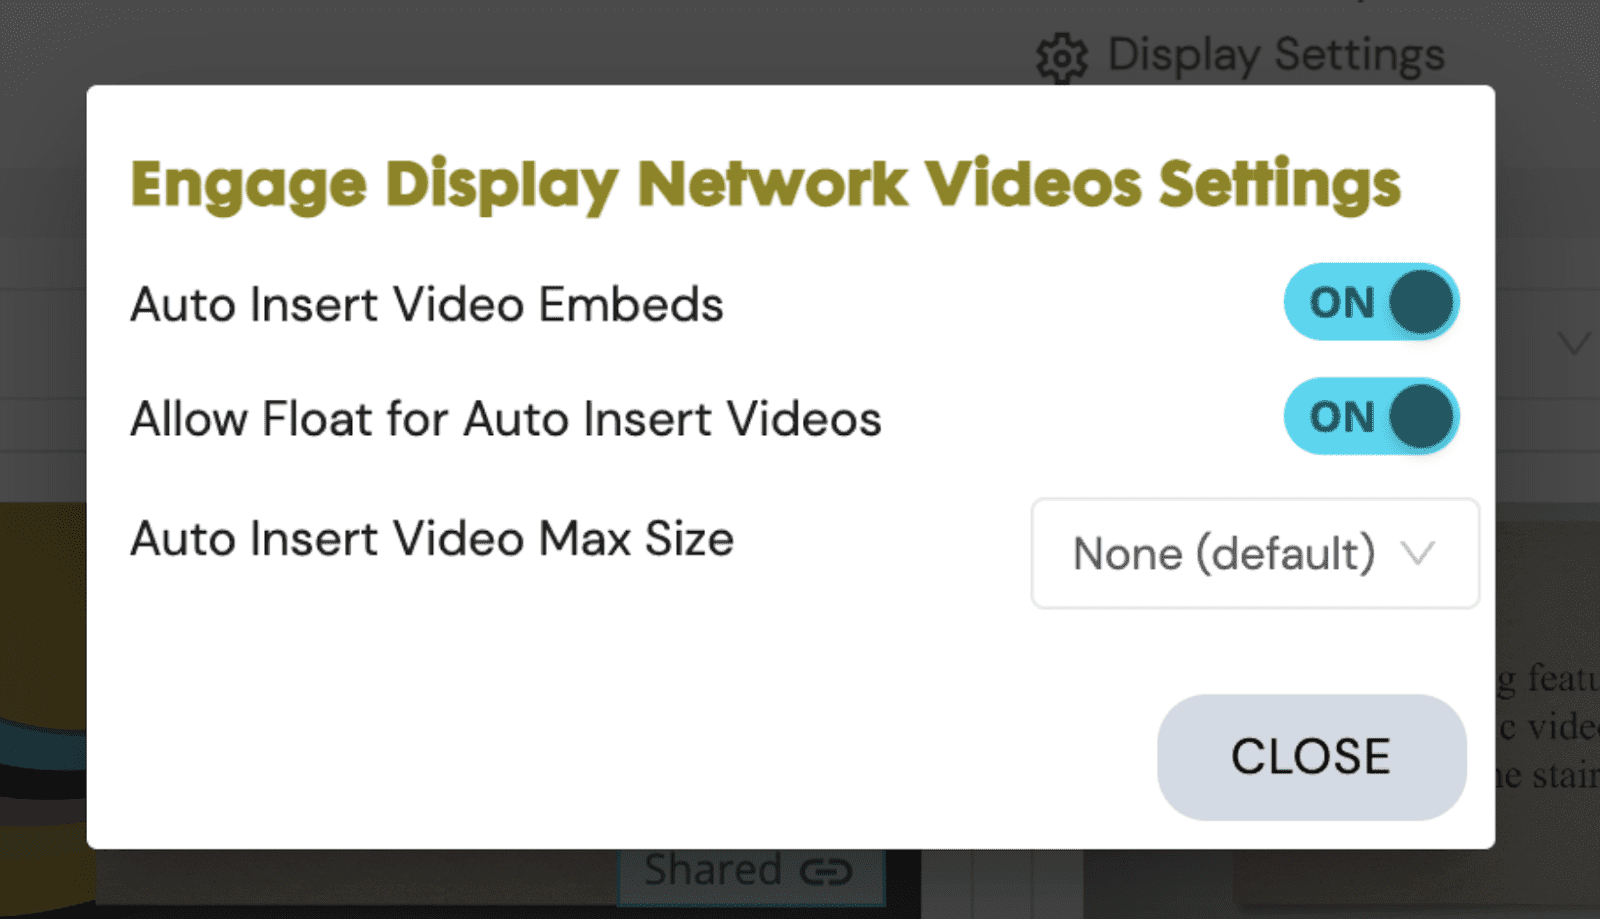 make sure both of these settings are turned on by selecting display settings and clicking